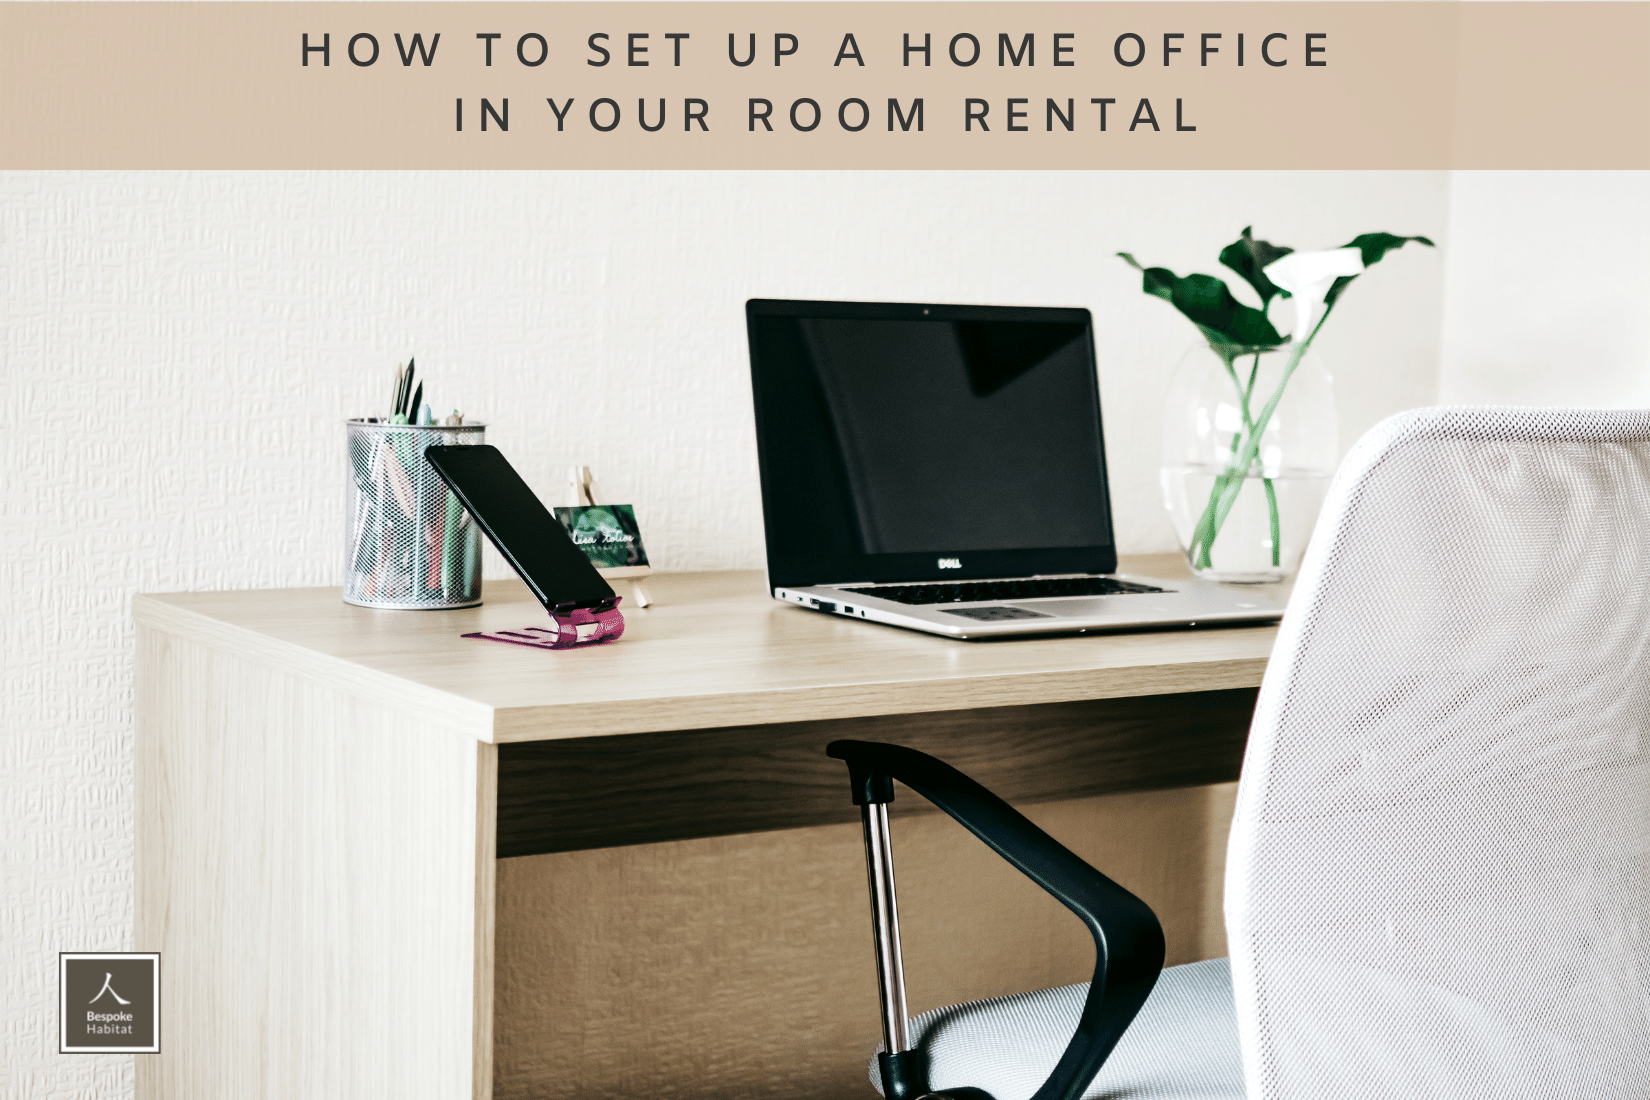 How to set up a home office in your room rental